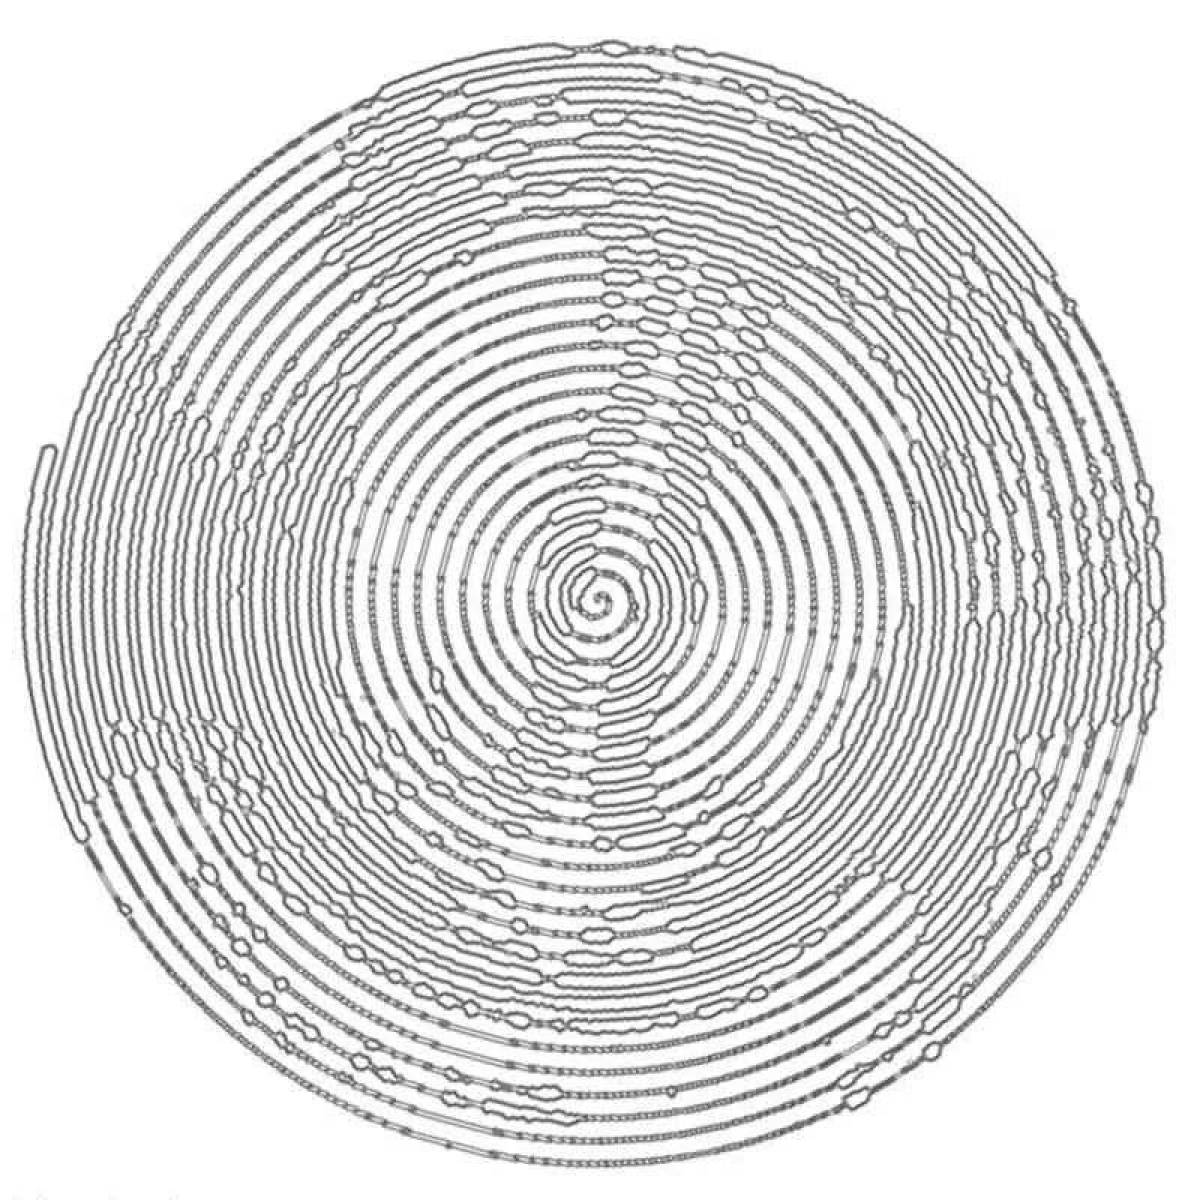 Inspirational coloring page hidden spiral pattern